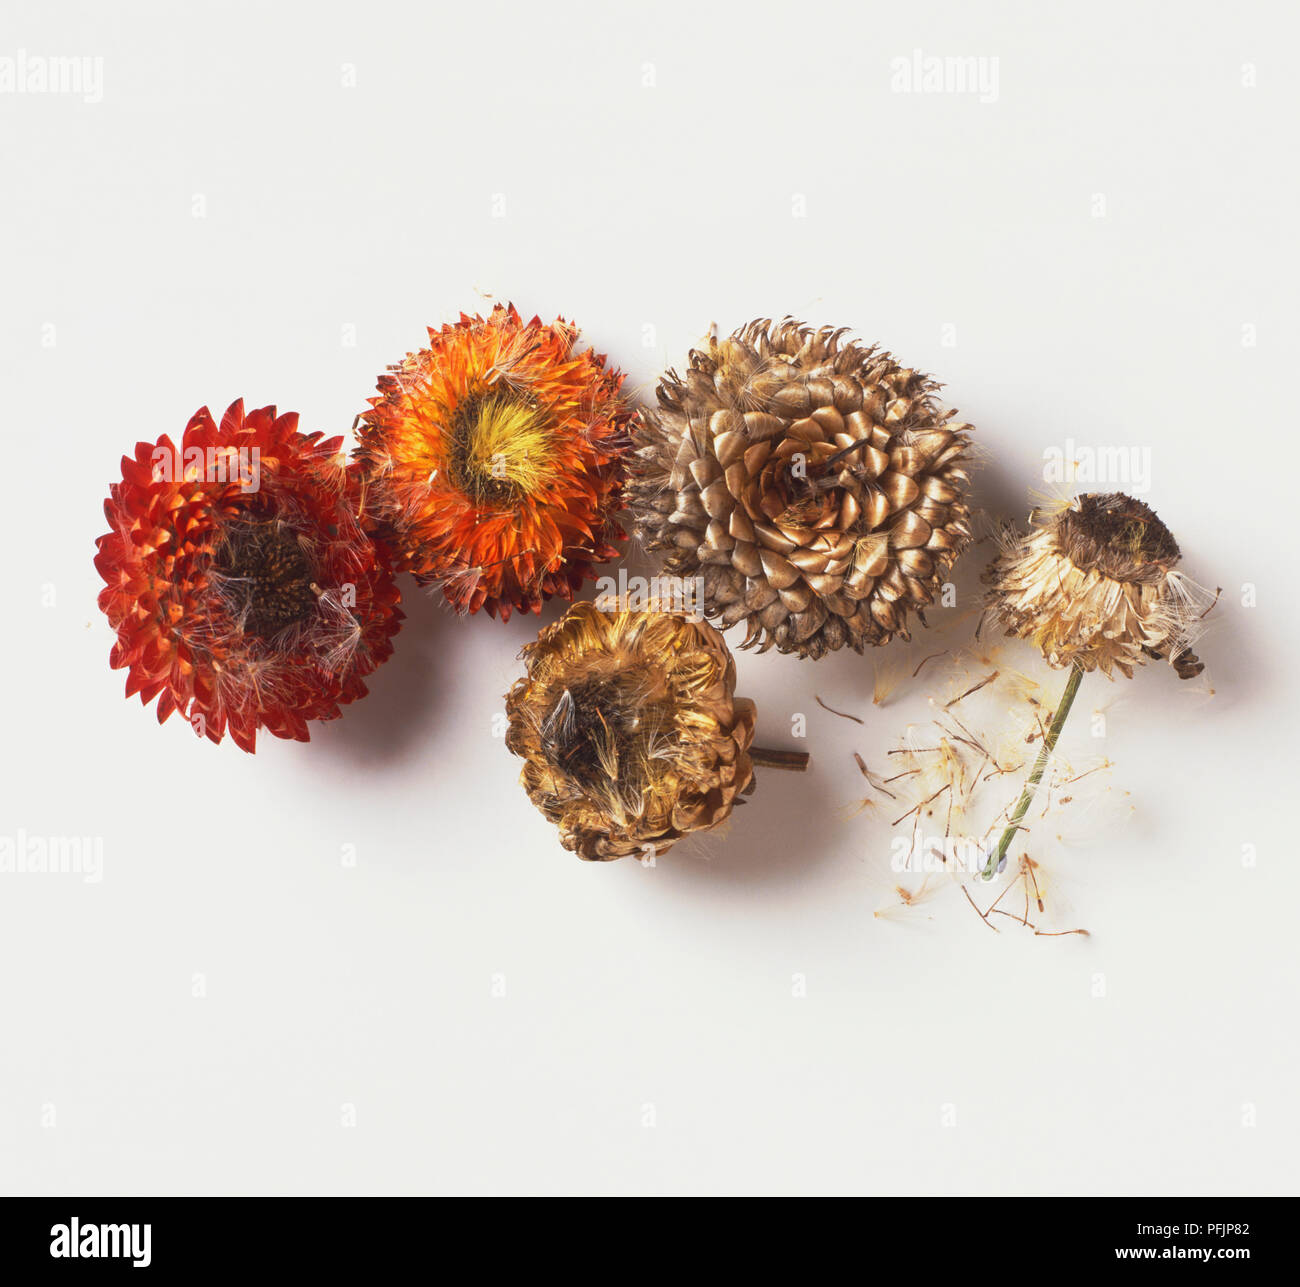 Examples of Helichrysum flower heads Stock Photo